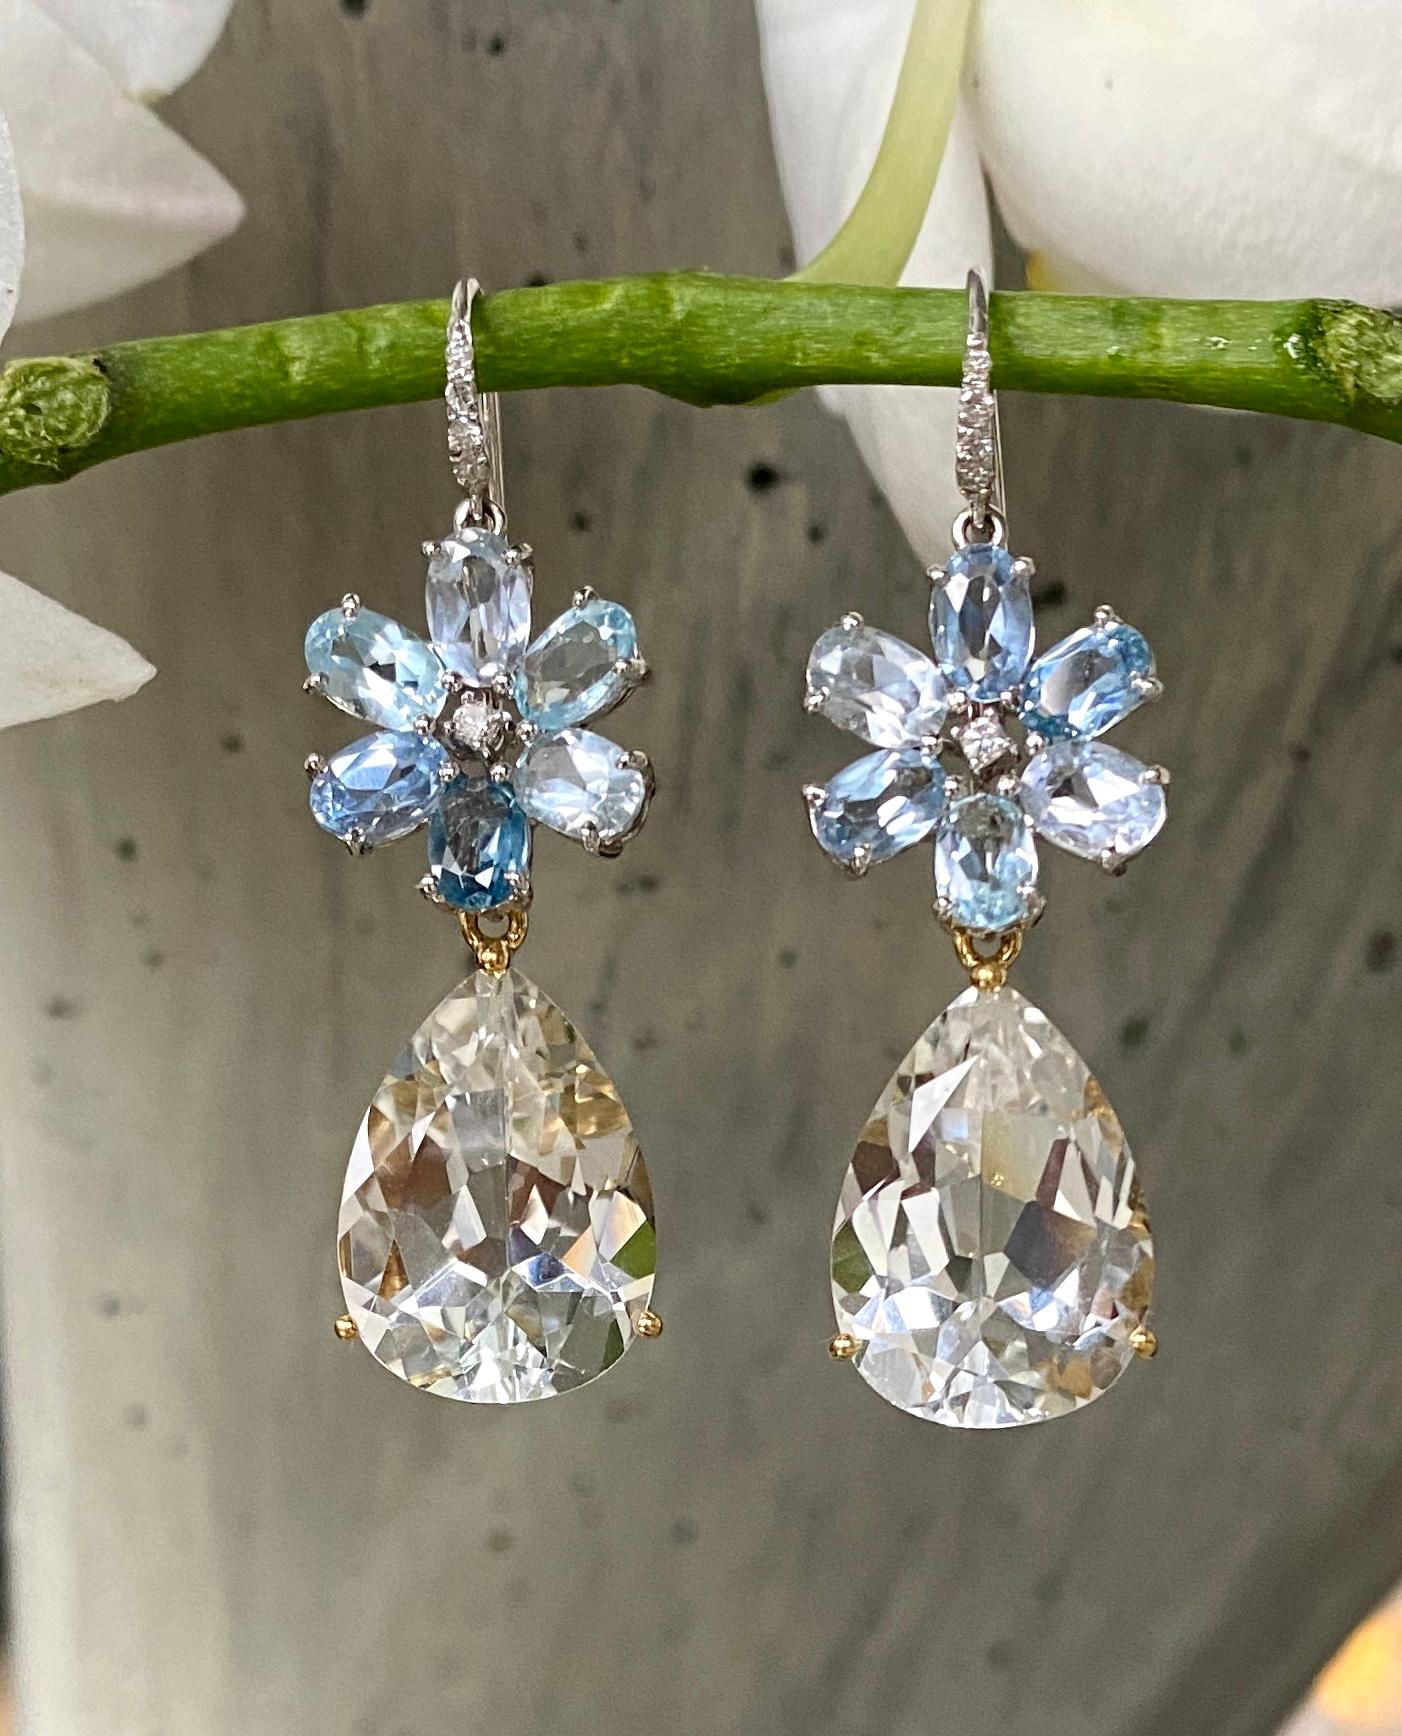 Earrings of aquamarine and diamond flowers with detachable pear shape white topaz drops, handcrafted in 18 Karat white gold.

These exquisite earrings of aquamarines and diamonds with detachable white topaz drops are a modern take on a classic look.